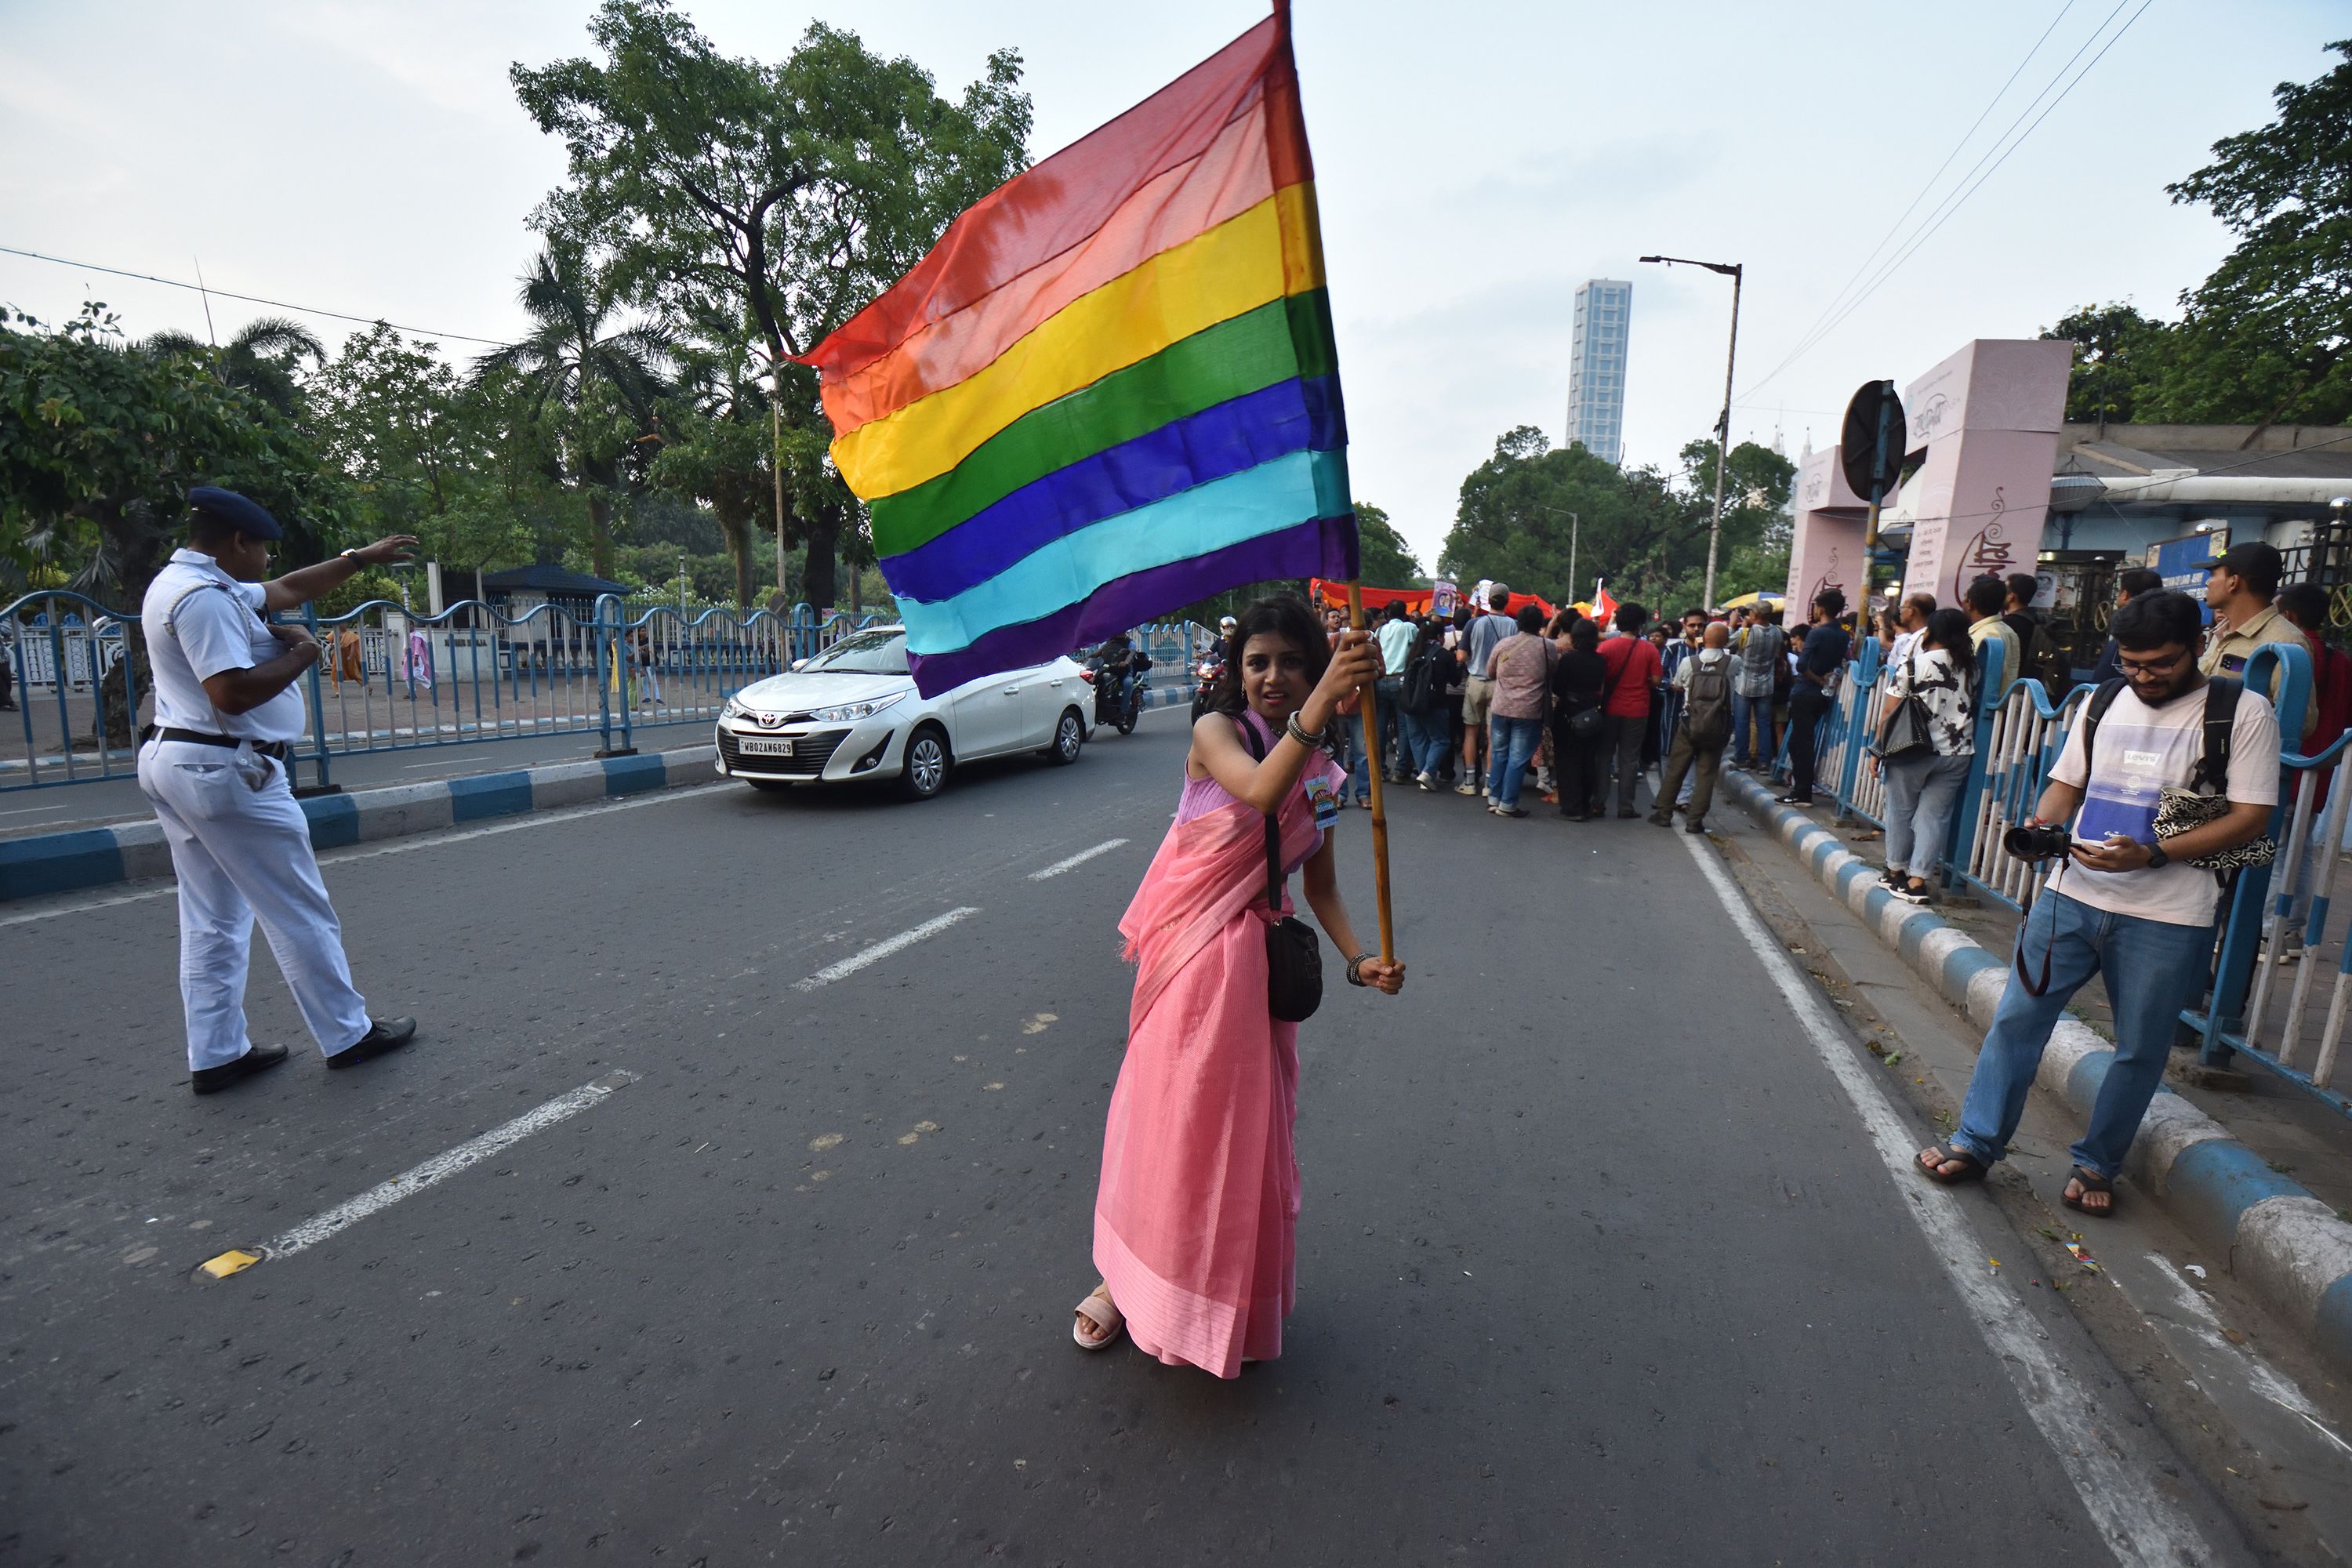 Indian court raises LGBT hopes of finding home in traditional faiths